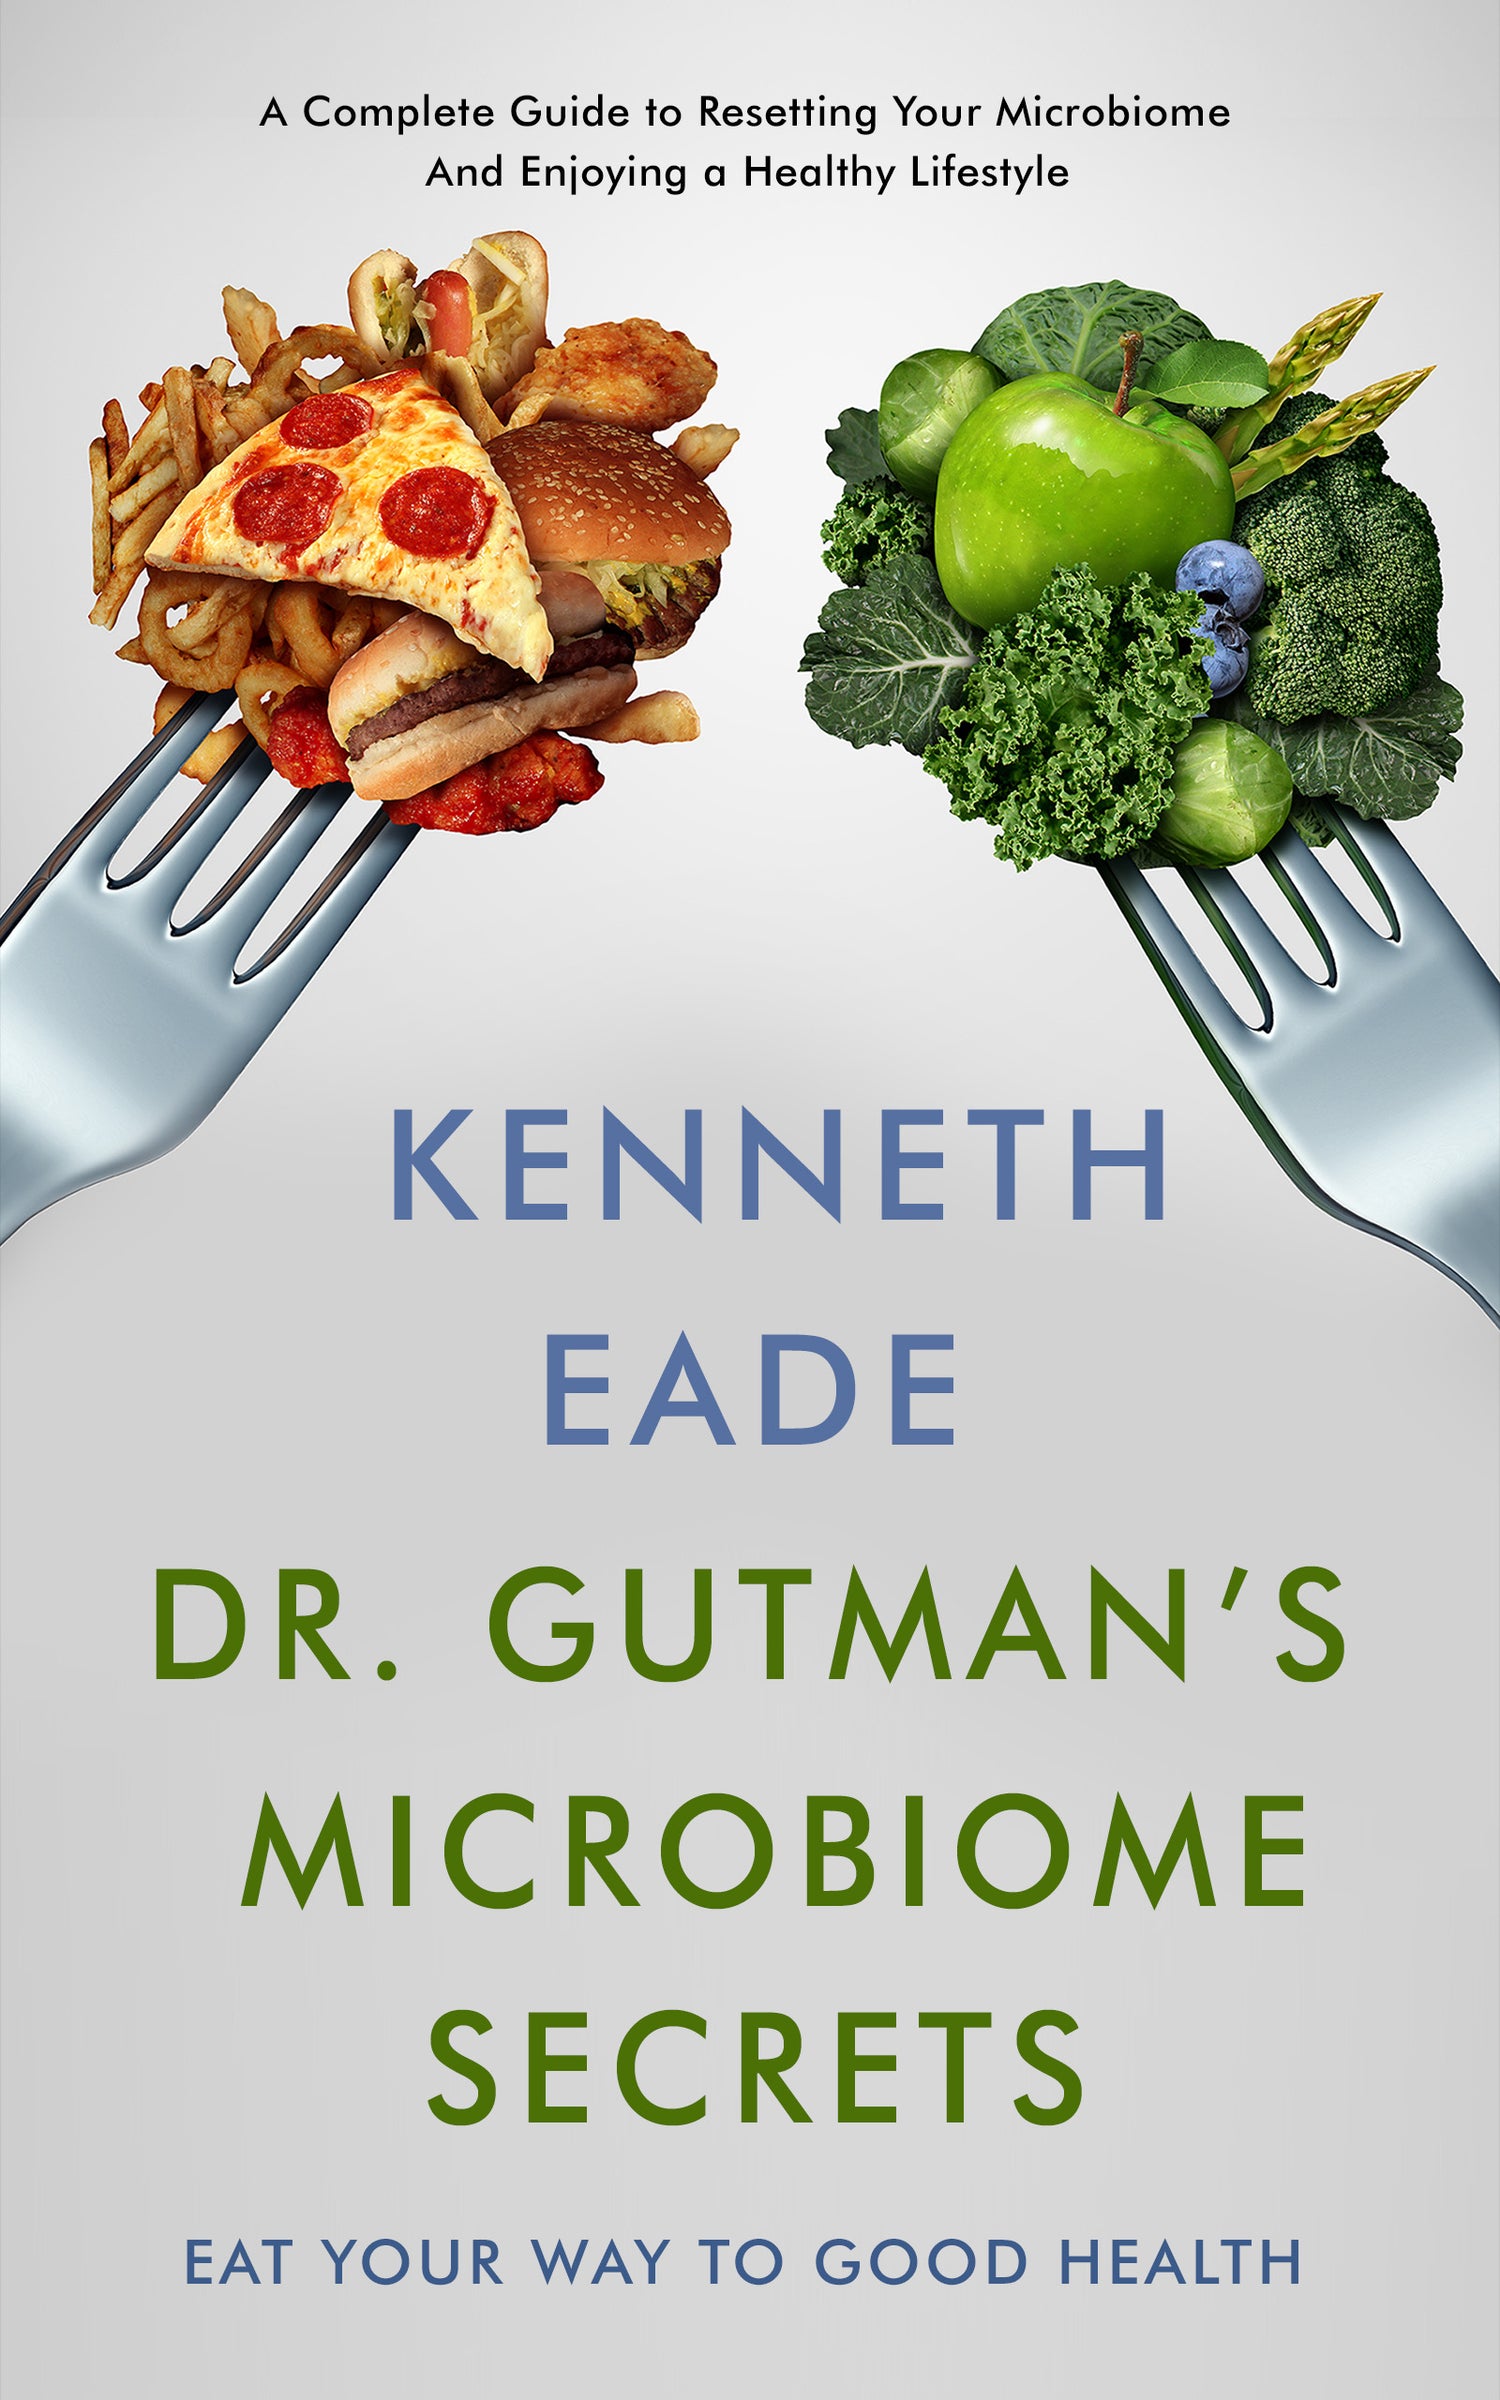 Dr. Gutman's Microbiome Secrets.  Eat Your Way to Good Health